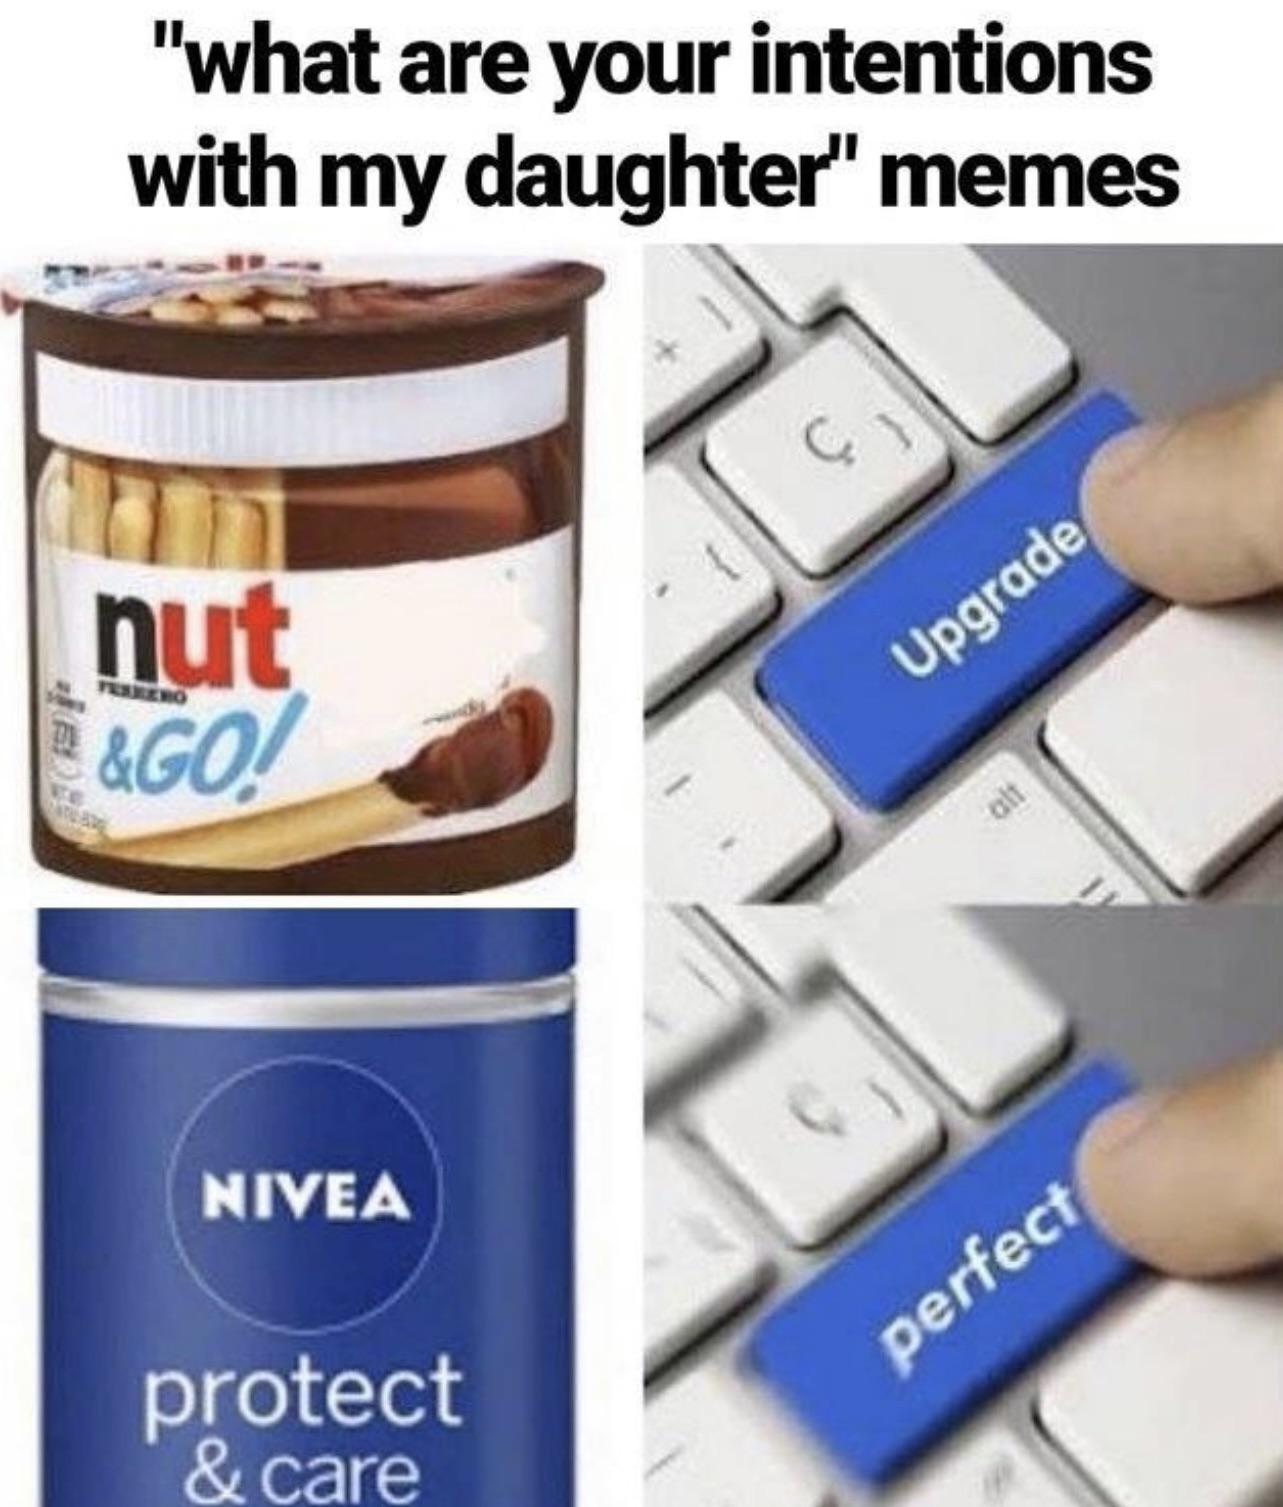 dank memes - jeff kaplan young - "what are your intentions with my daughter" memes nut E&Go! Upgrade alt Nivea perfect protect & care